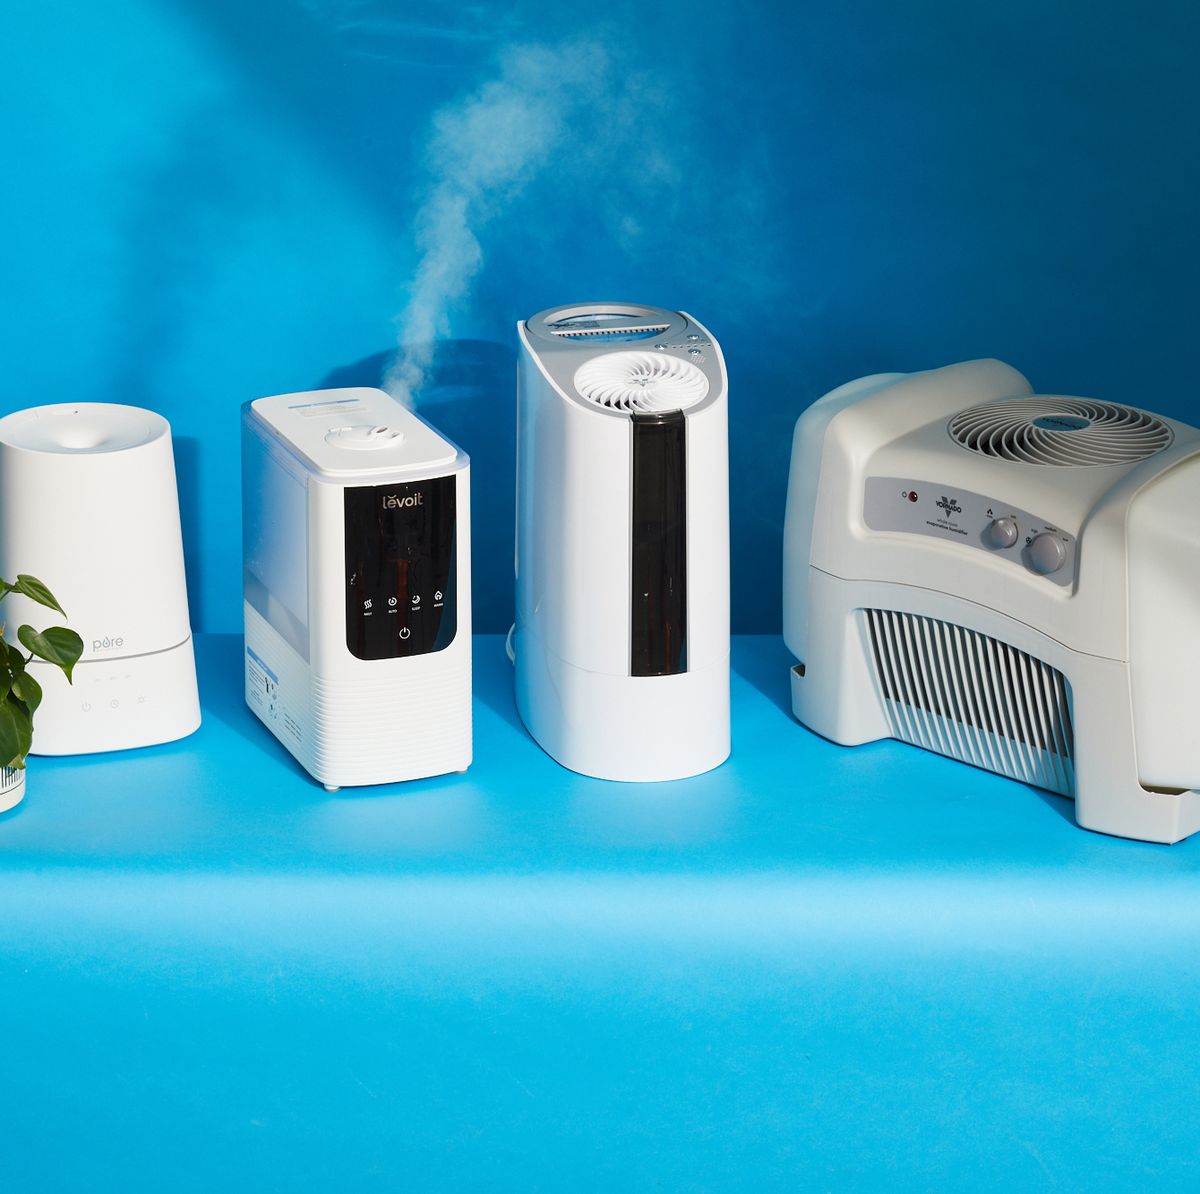 https://hips.hearstapps.com/hmg-prod/images/ghk-digital-index-humidifiers-247-1670960433.jpg?crop=0.670xw:1.00xh;0.131xw,0&resize=1200:*